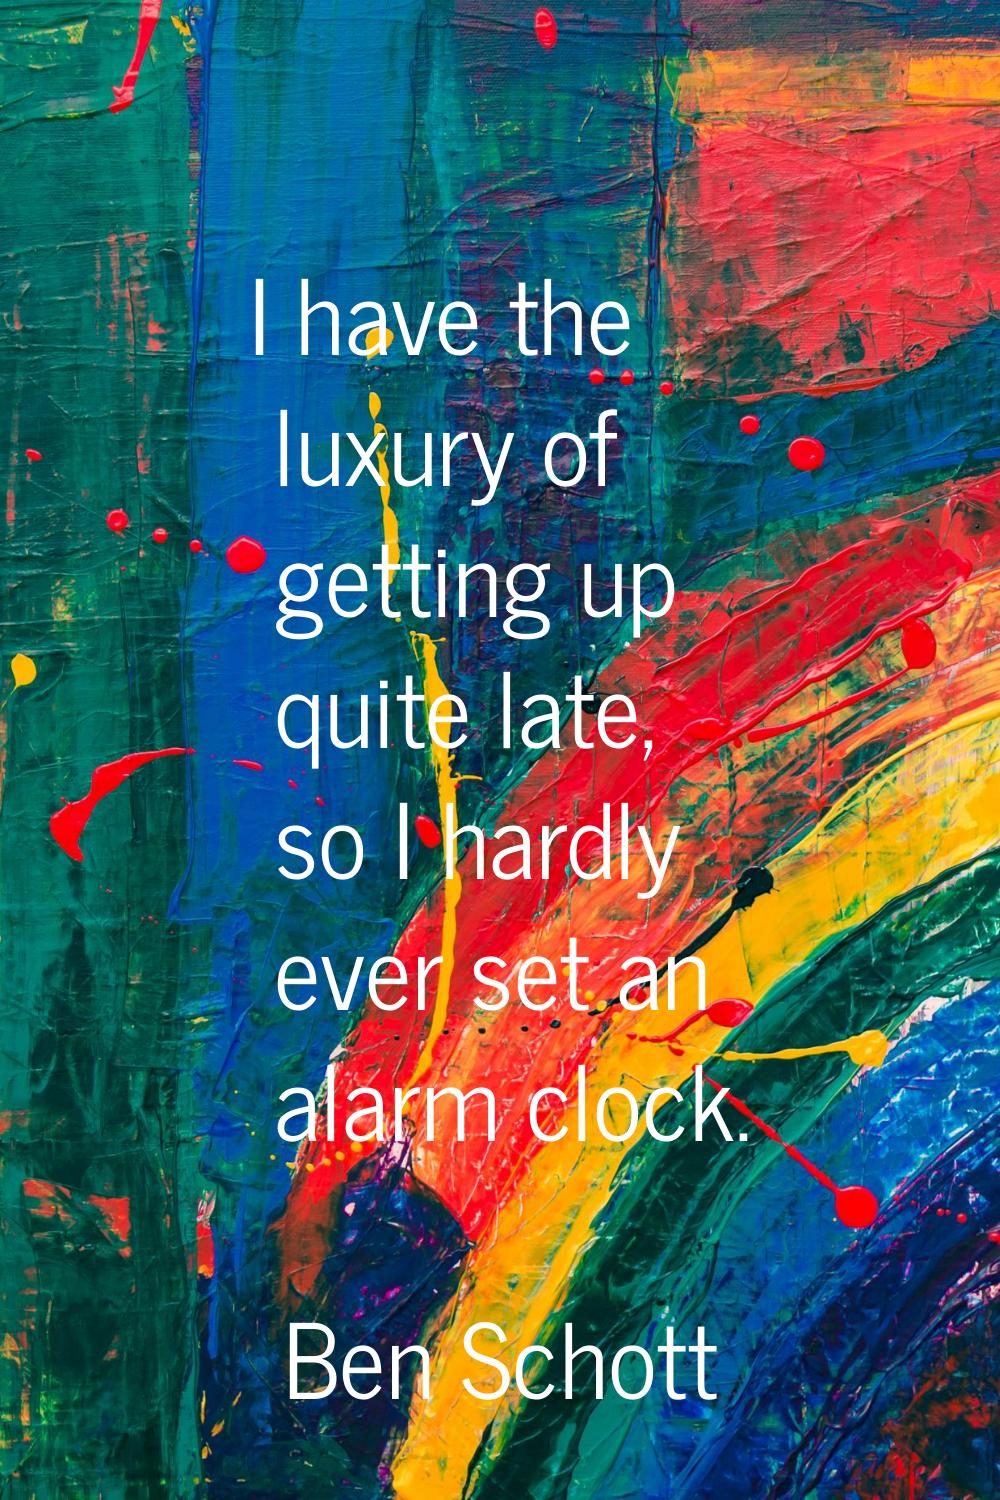 I have the luxury of getting up quite late, so I hardly ever set an alarm clock.